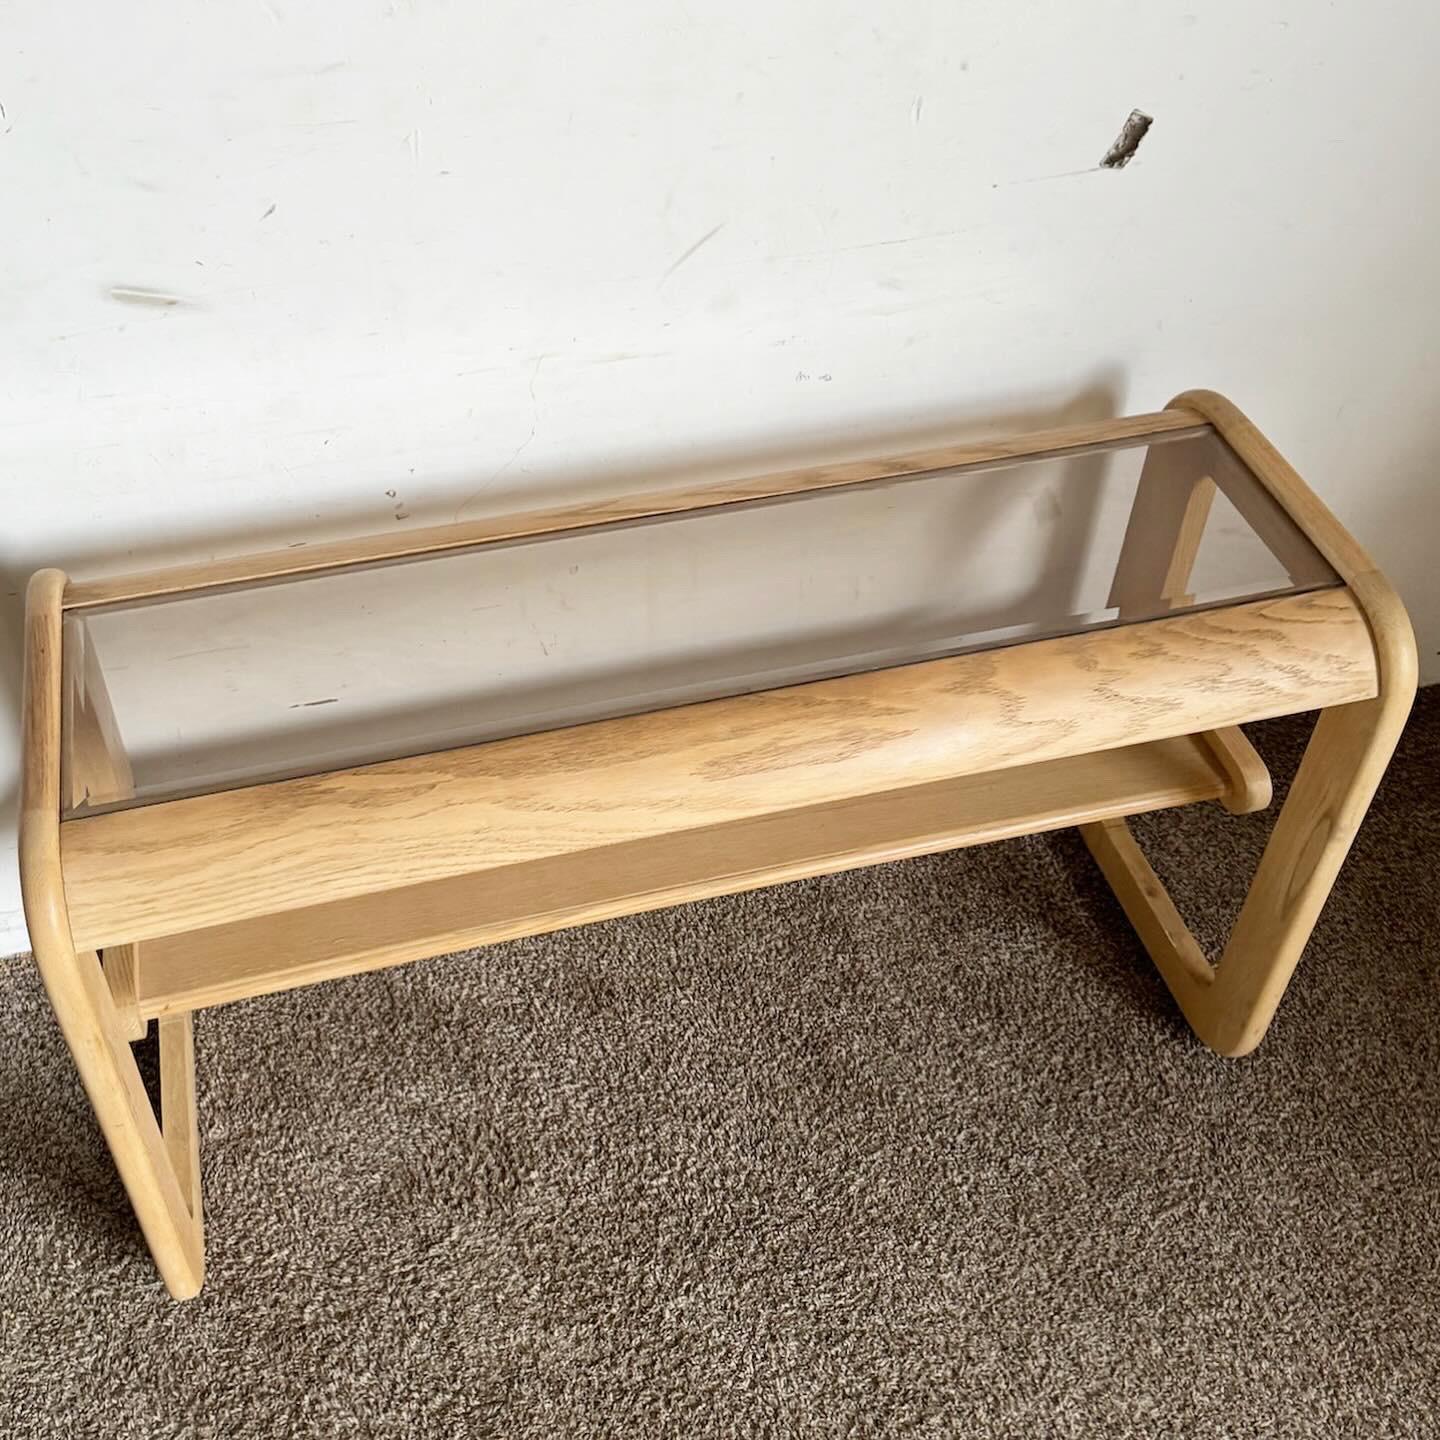 Embrace the timeless design of the Mid Century Modern Oak Console Table by Lou Hodges. This elegant piece combines a sturdy oak frame with a sophisticated smoked glass top. Its minimalist lines reflect Mid Century Modern aesthetics, making it